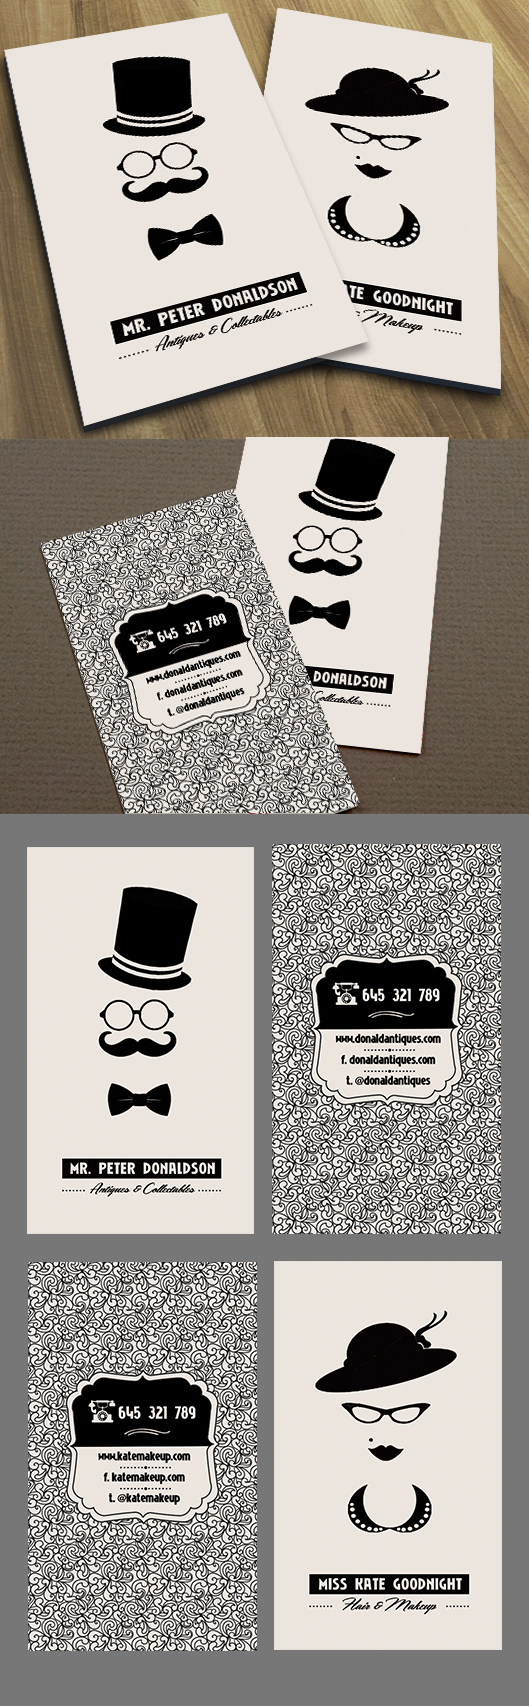 geeky business cards 4